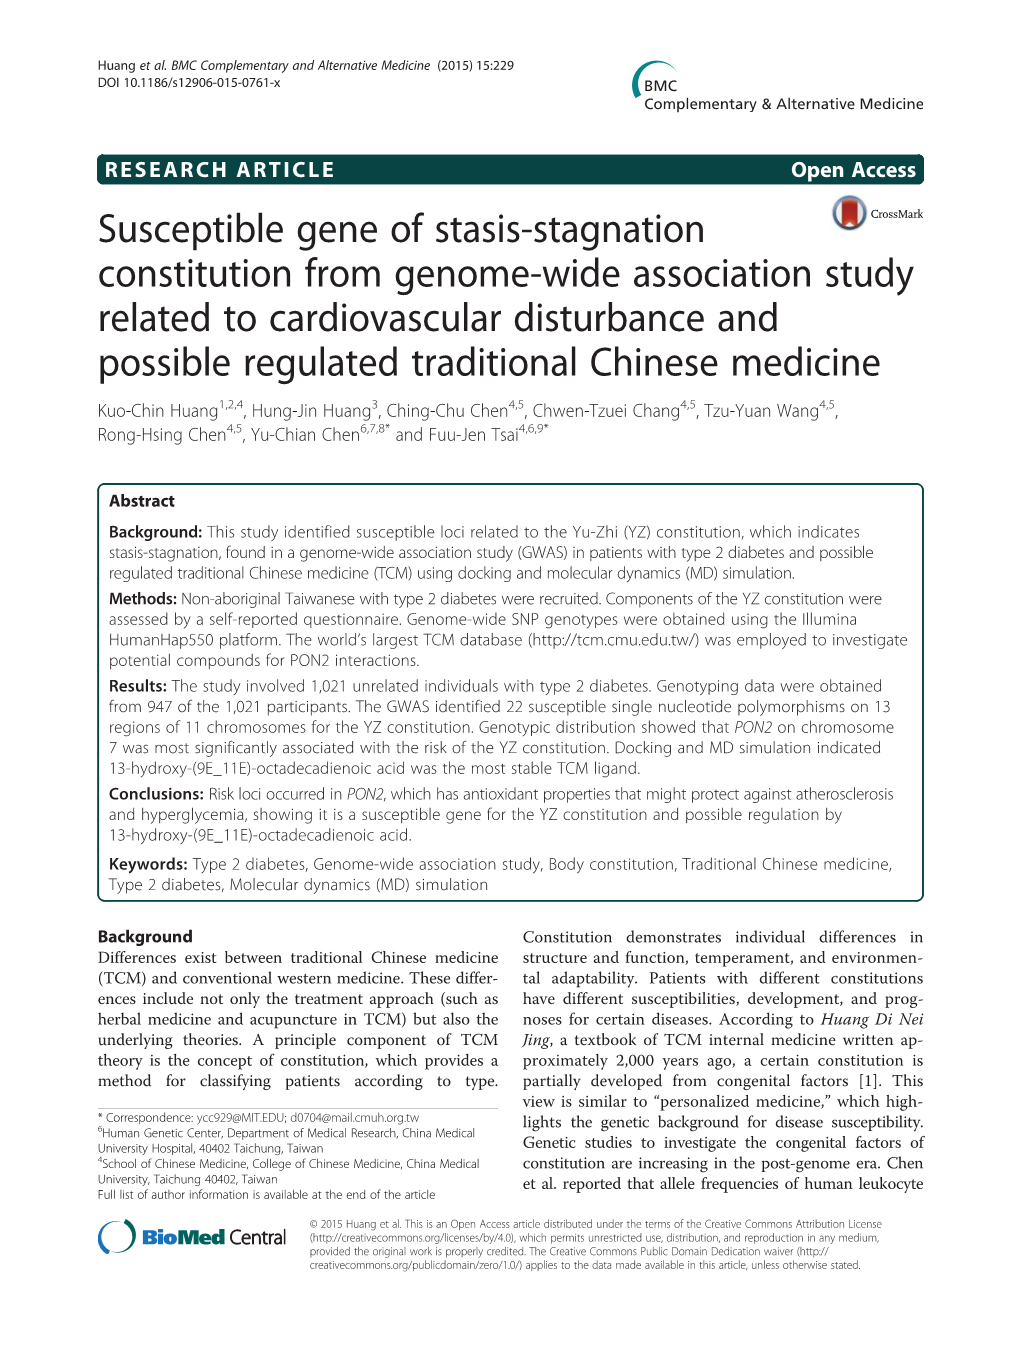 Susceptible Gene of Stasis-Stagnation Constitution from Genome-Wide